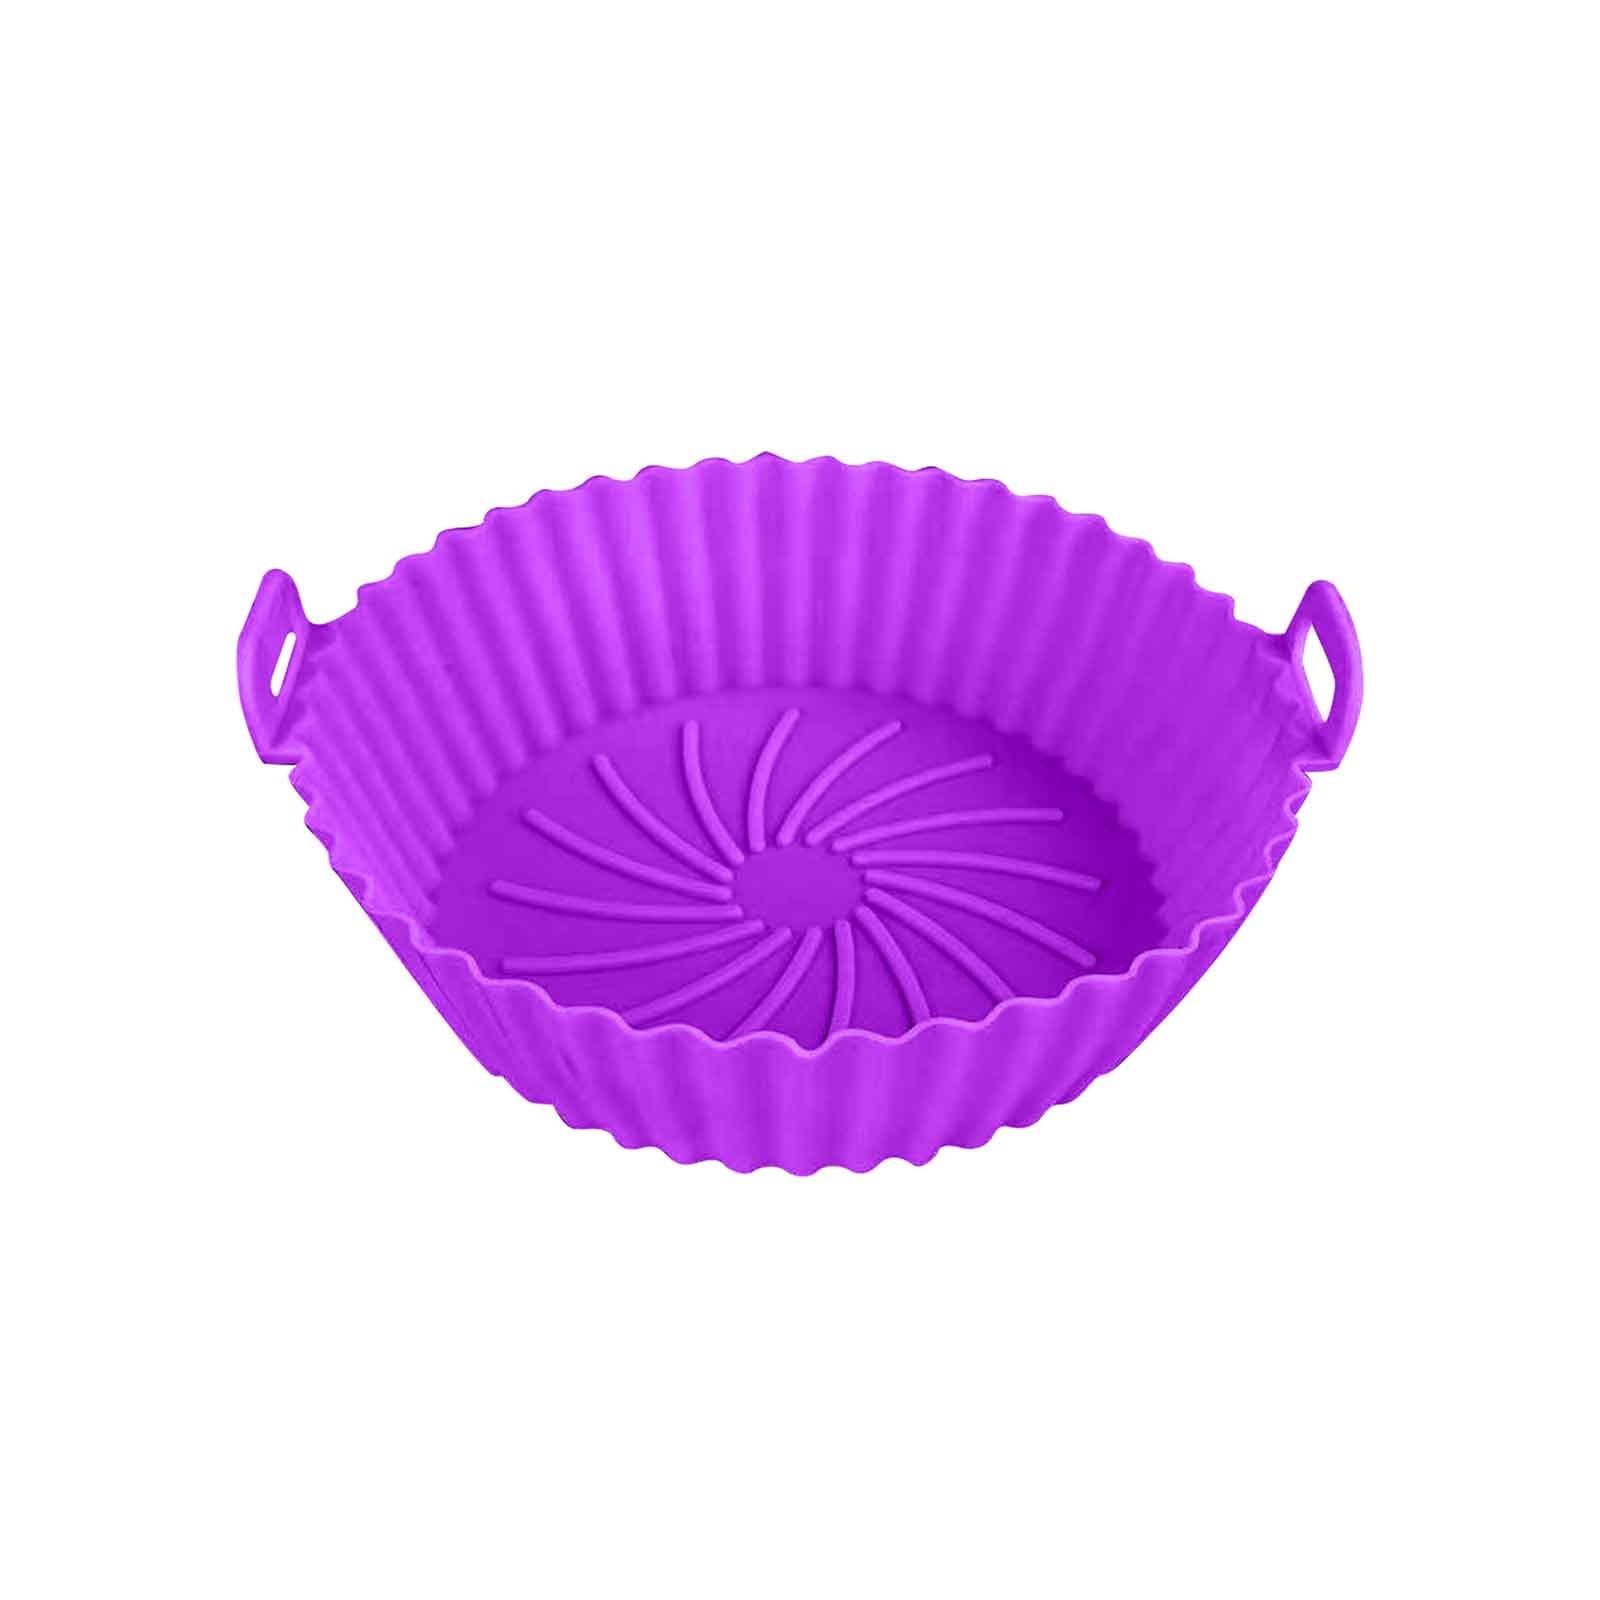 Vikakiooze Silicone Loaf Pan, Non Stick and Easy To Release